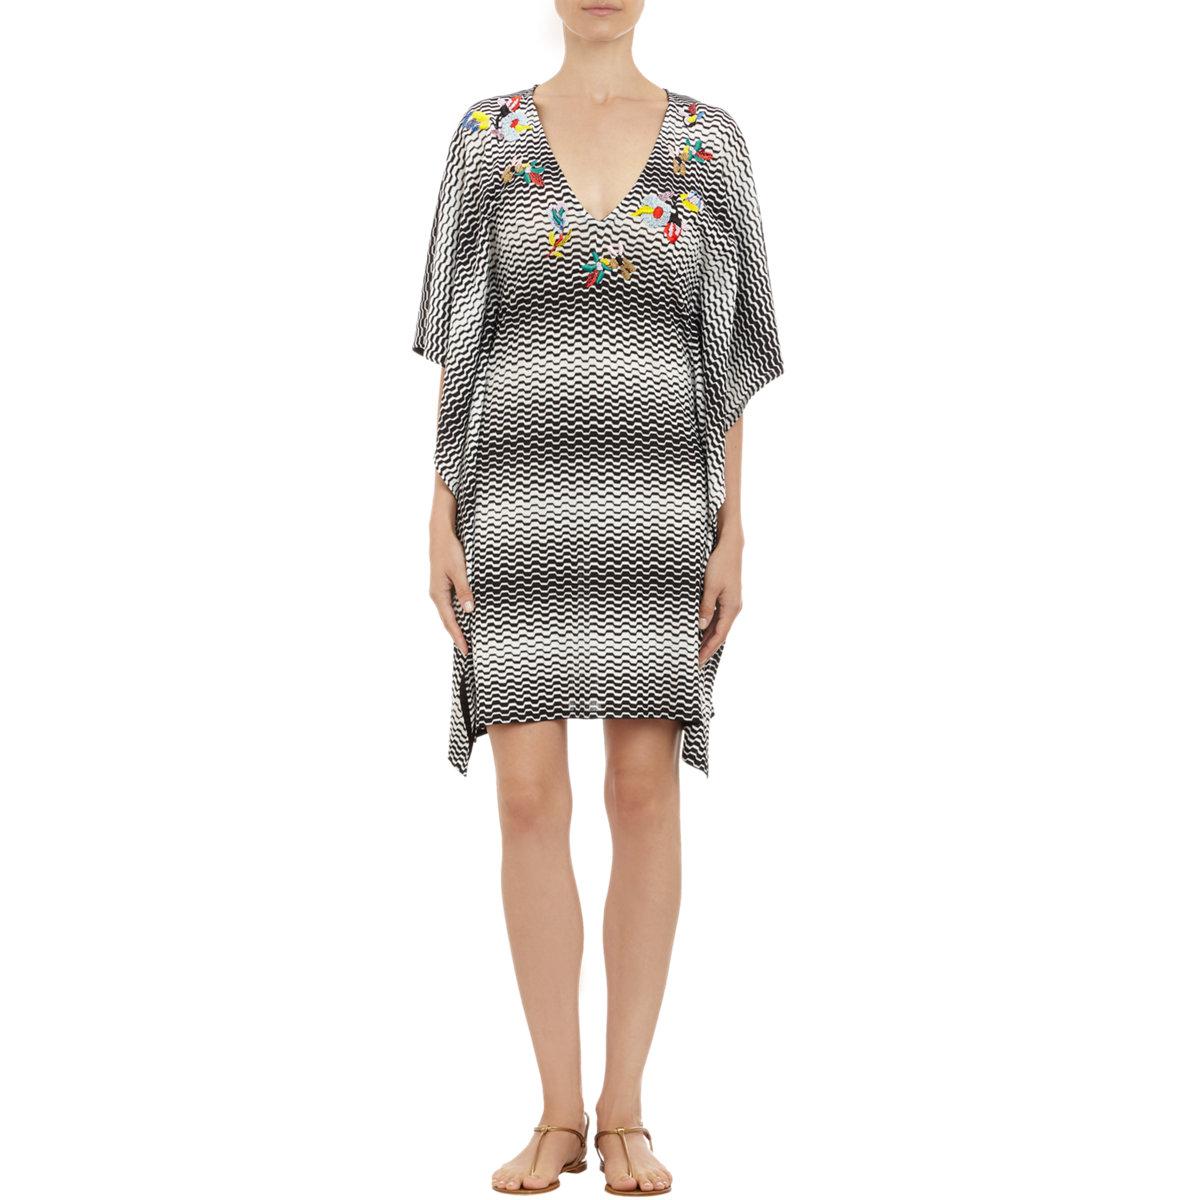 NEW Missoni Hand-Embroidered Chevron Crochet Knit Dress Kaftan Tunic Cover Up 46 For Sale 3